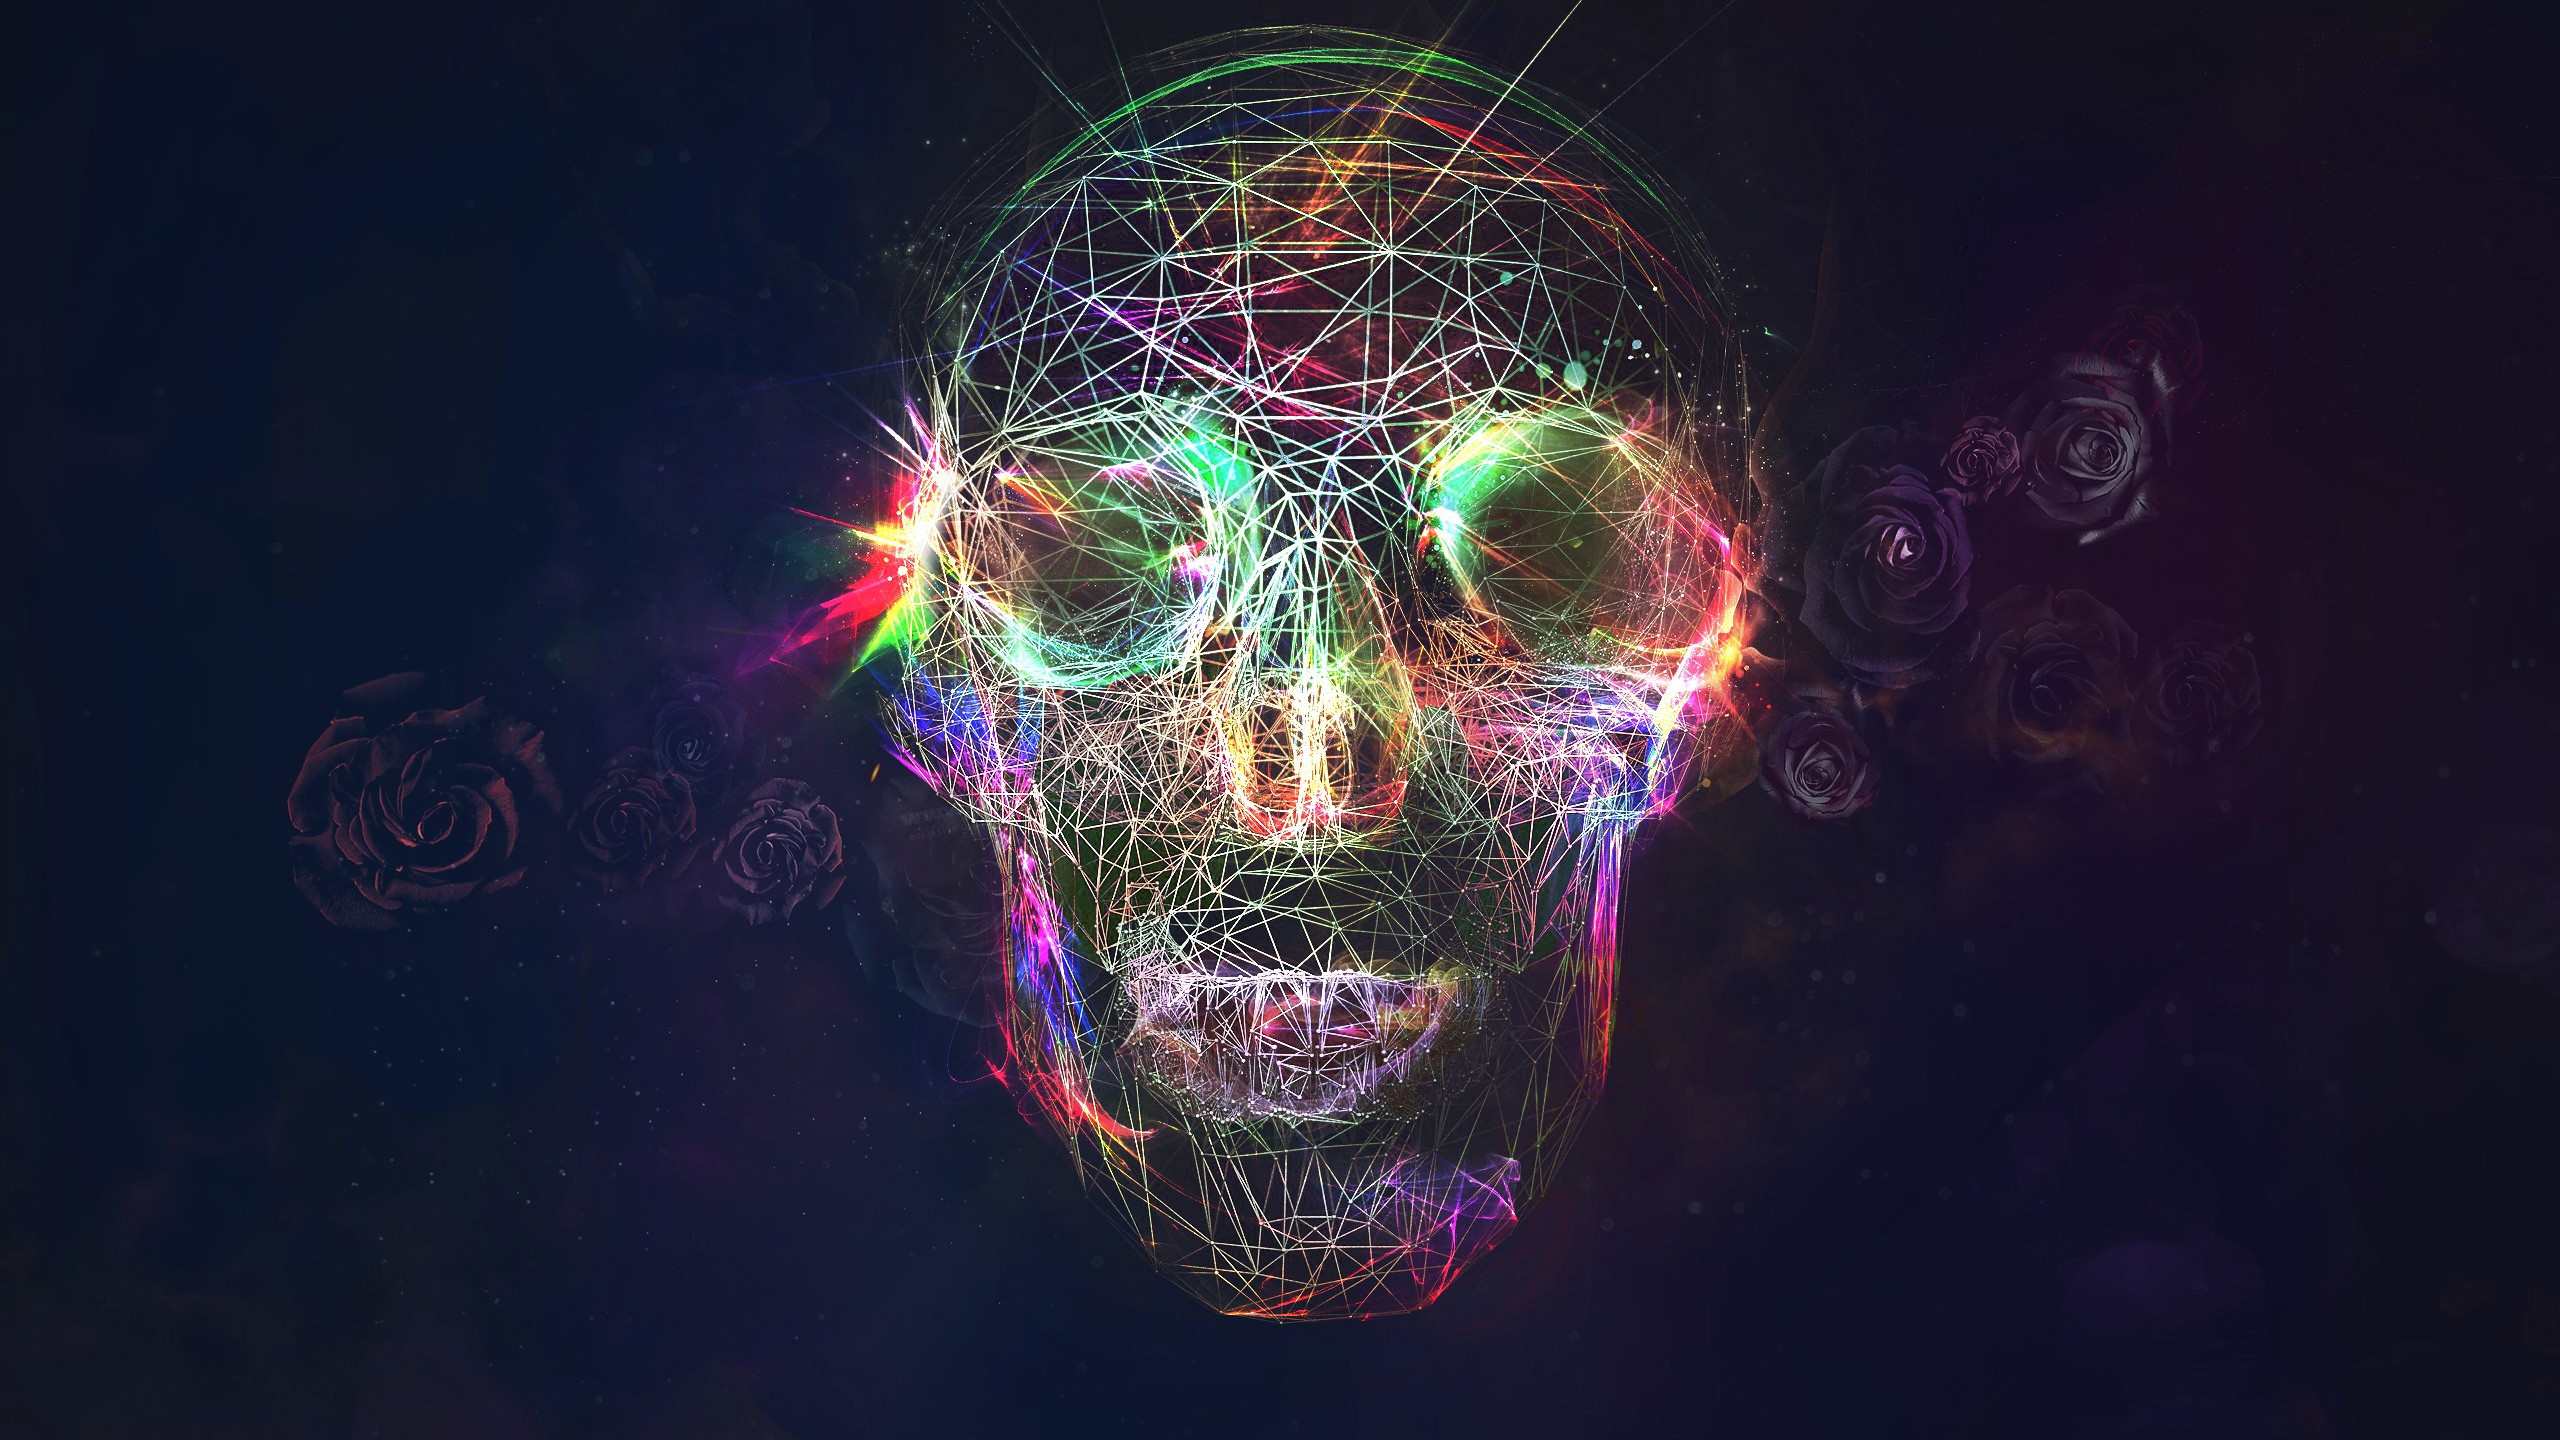 Abstract Skull Wallpaper And Image Pictures Photos